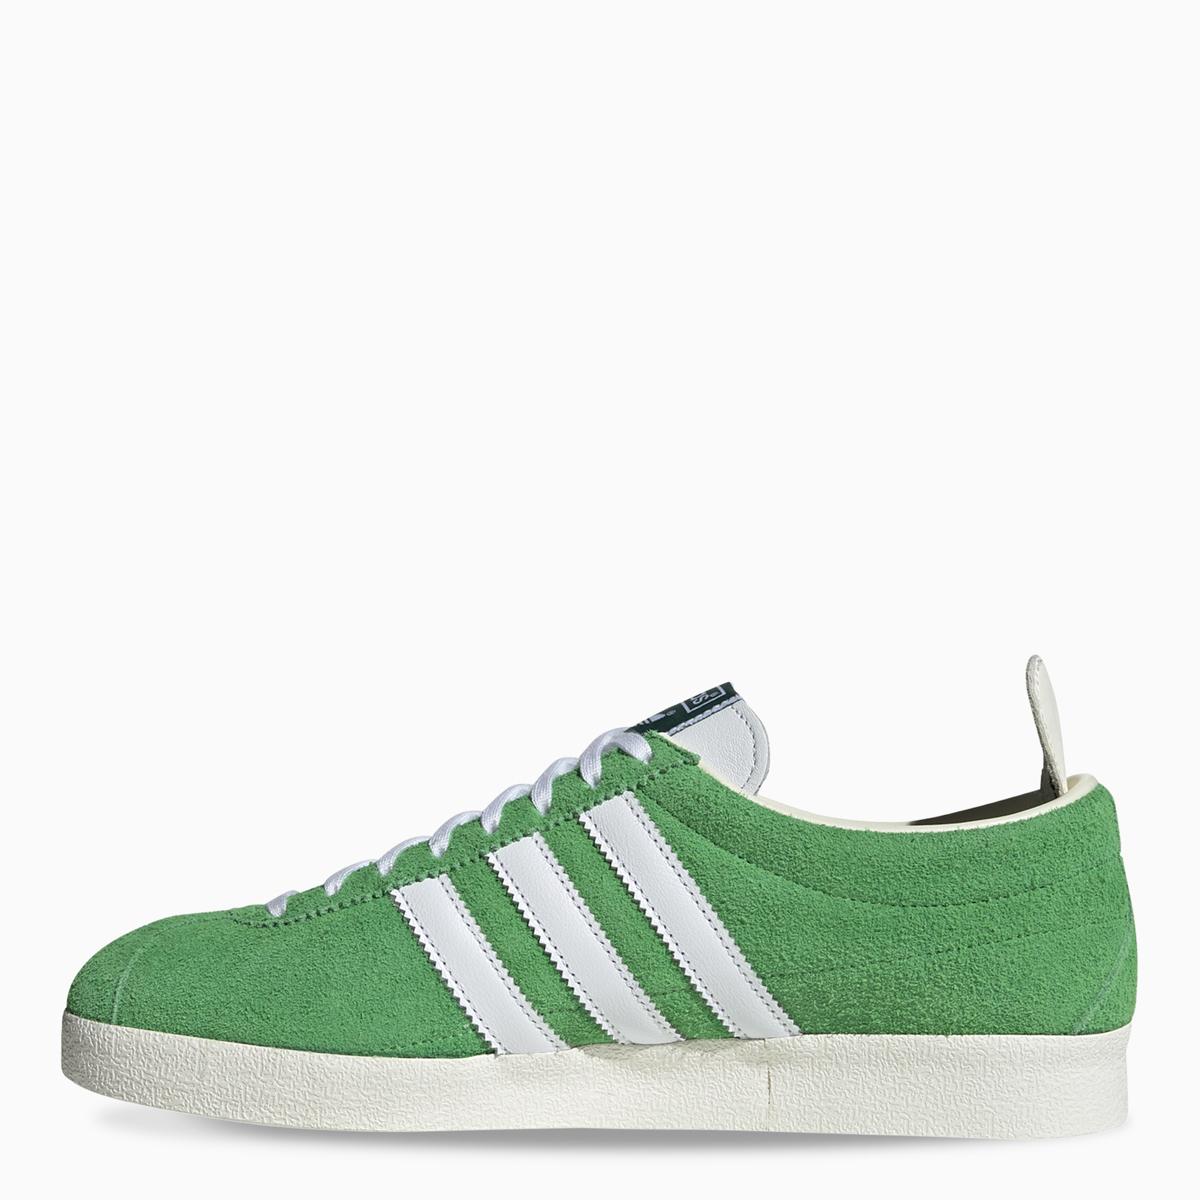 adidas Originals Lace Gazelle Vintage Trainers in Lime Green (Green) | Lyst